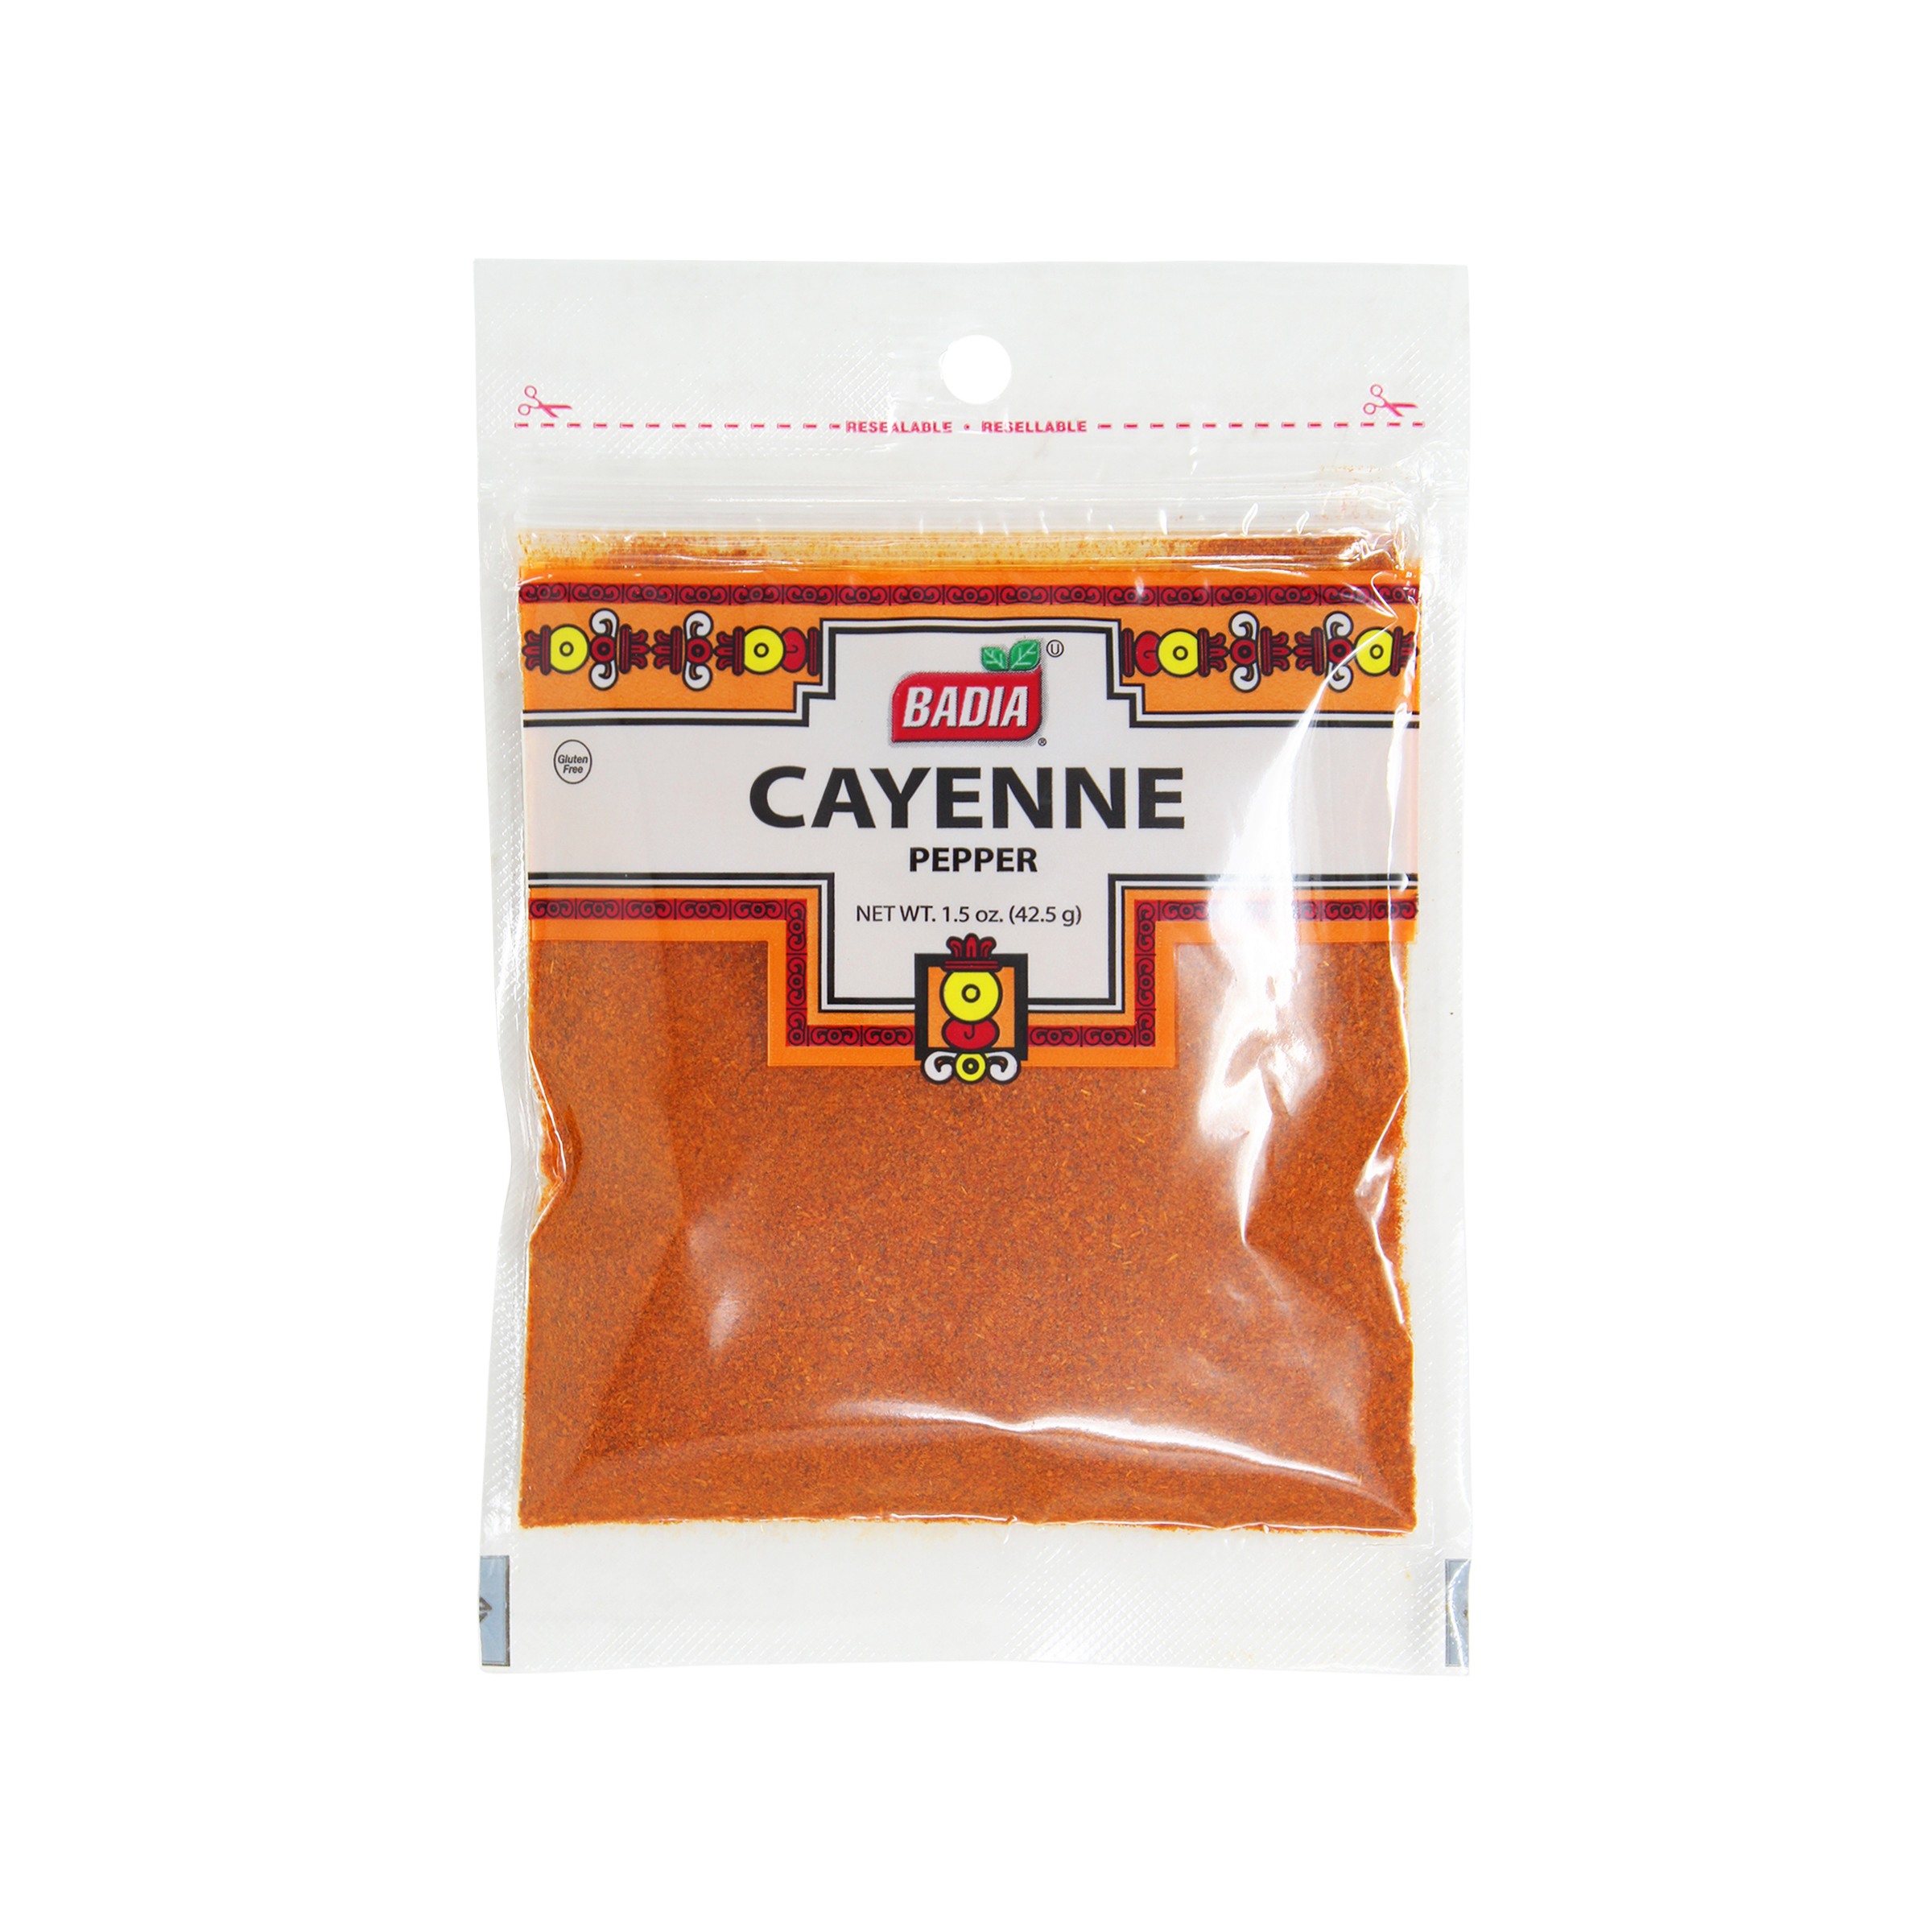 Shop Cayenne Pepper Powder For Cooking Recipes Spiceology